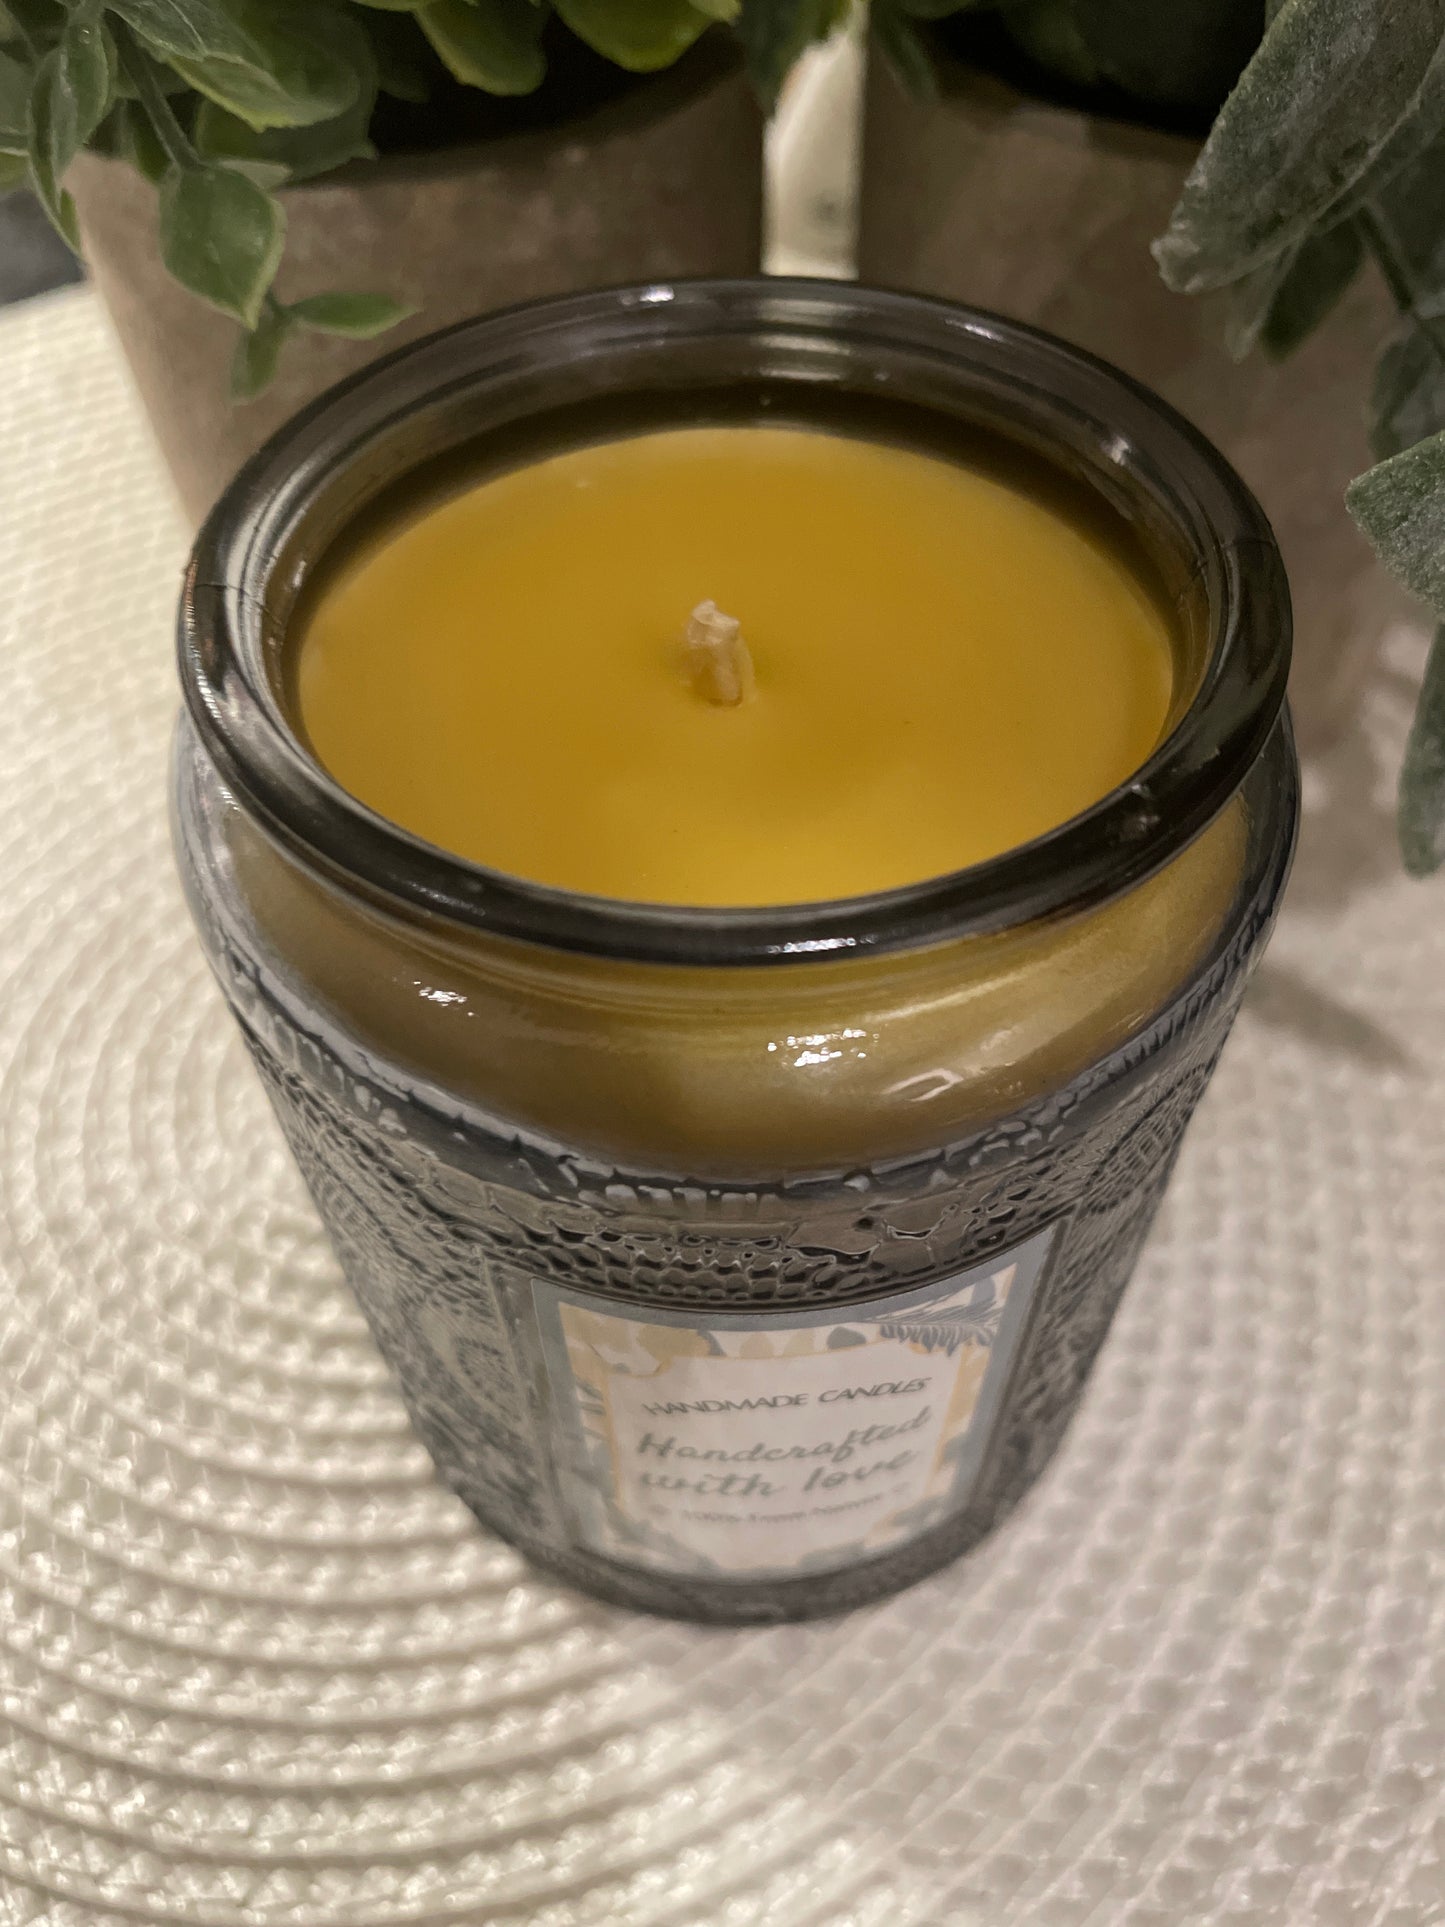 8oz Unscented Beeswax Candle